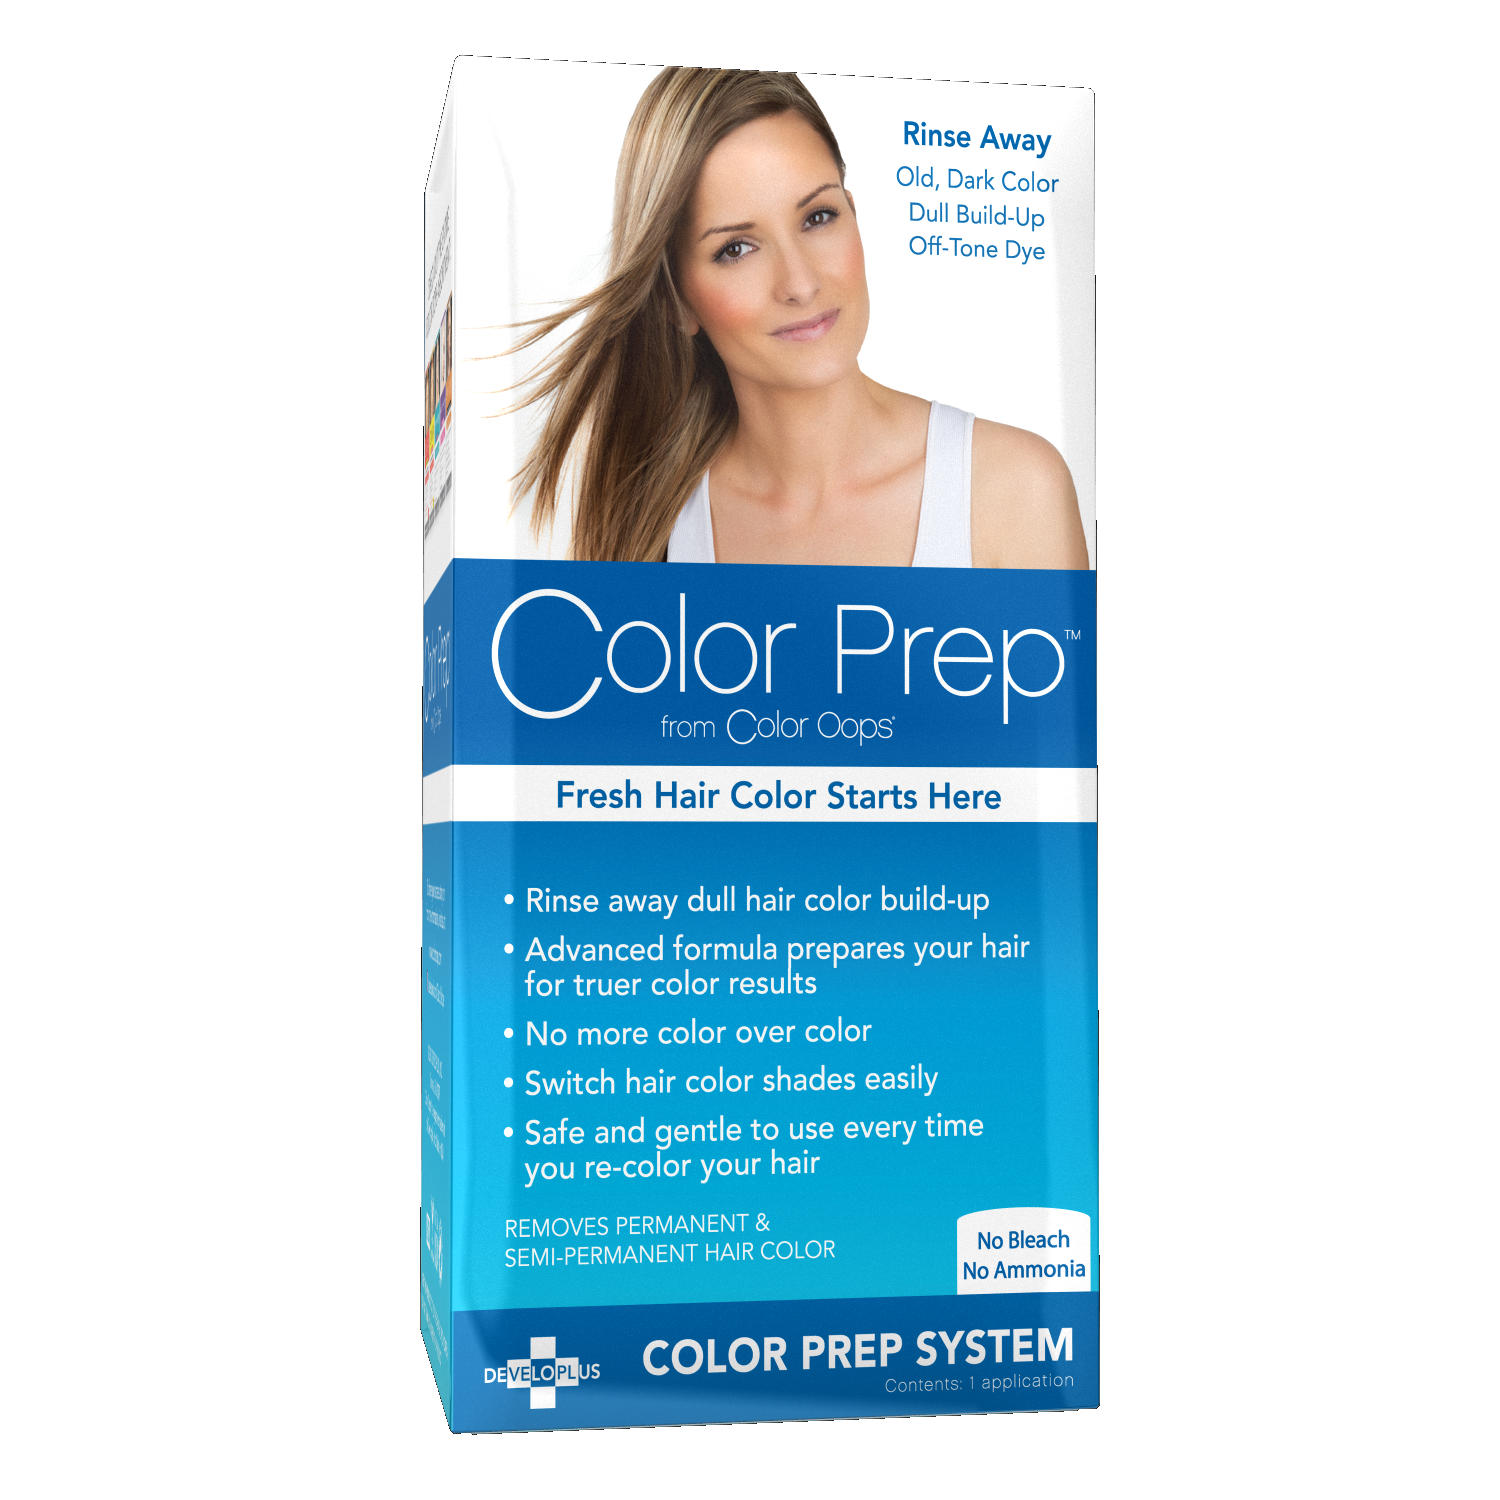 Color Oops Brass Correct, Purple Conditioning Treatment – EP Beauty Supply